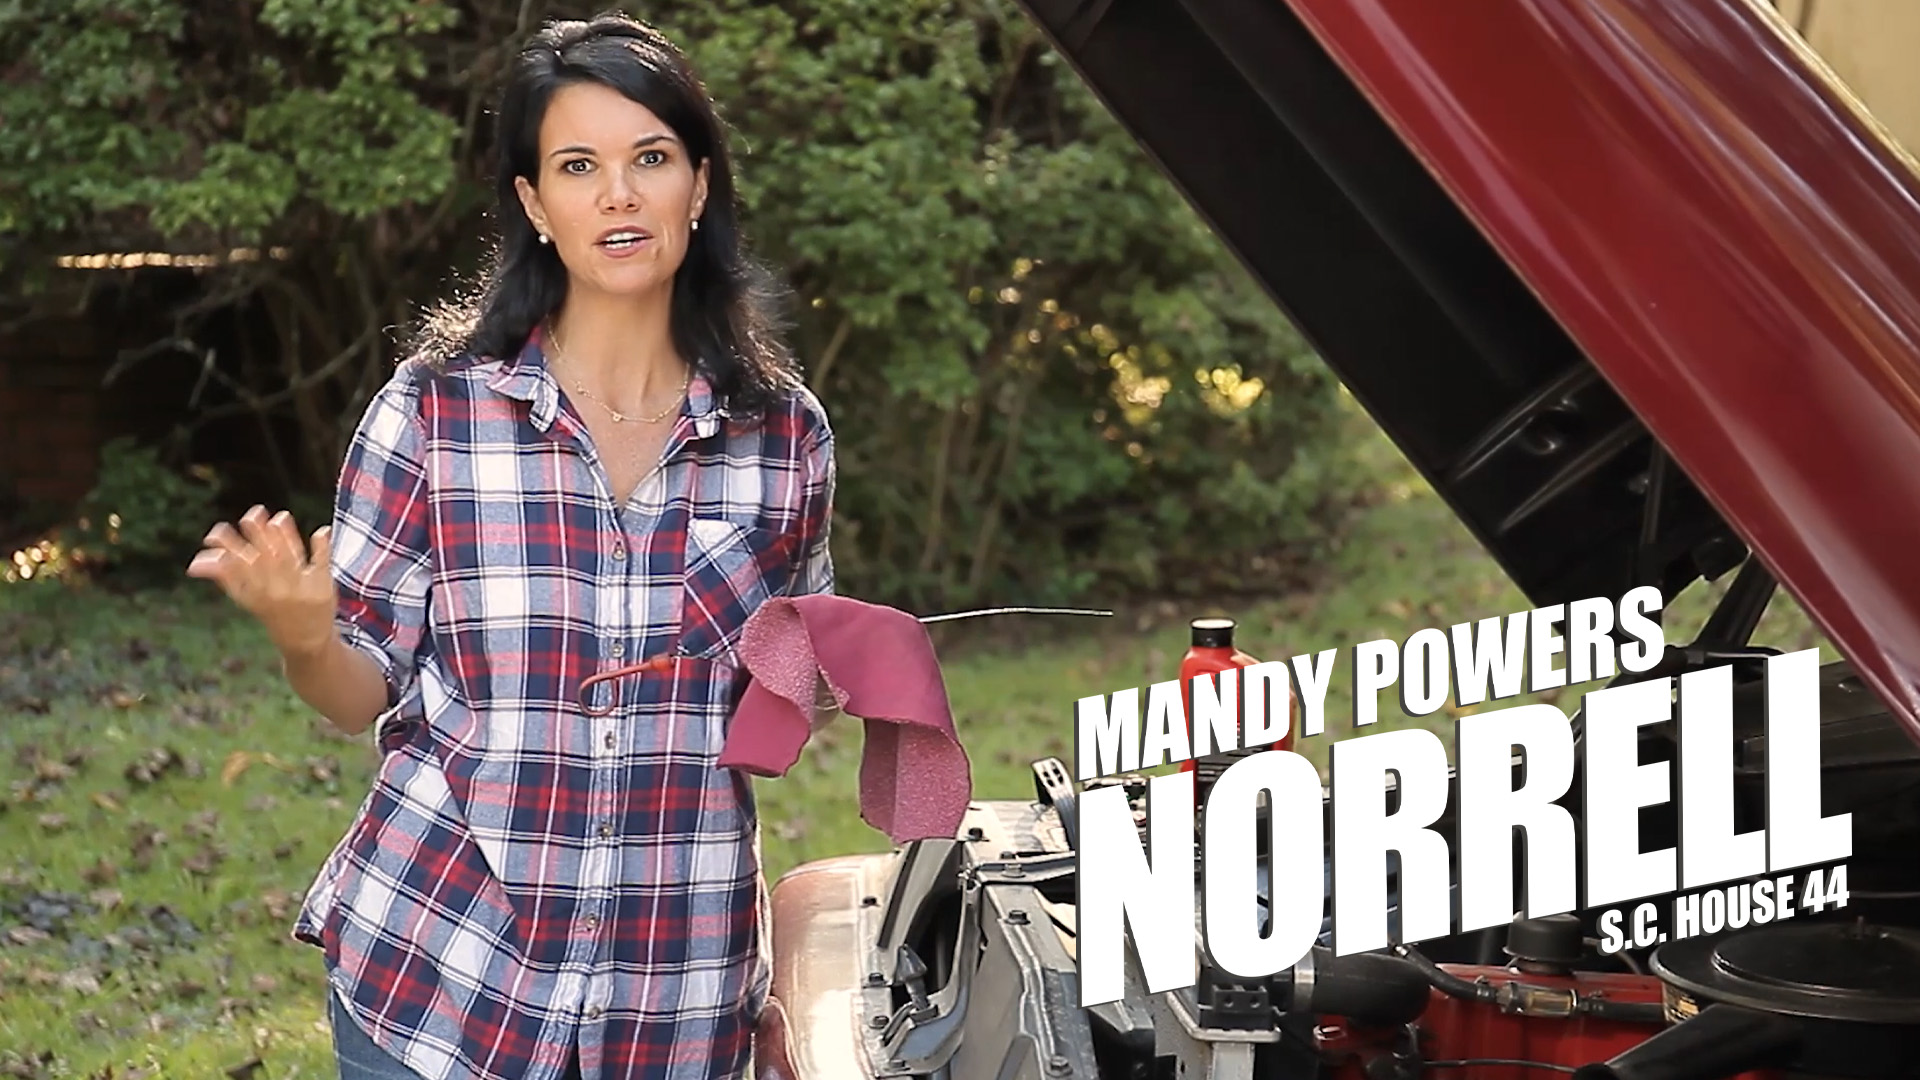 Mandy Norrell for S.C. House of Representatives